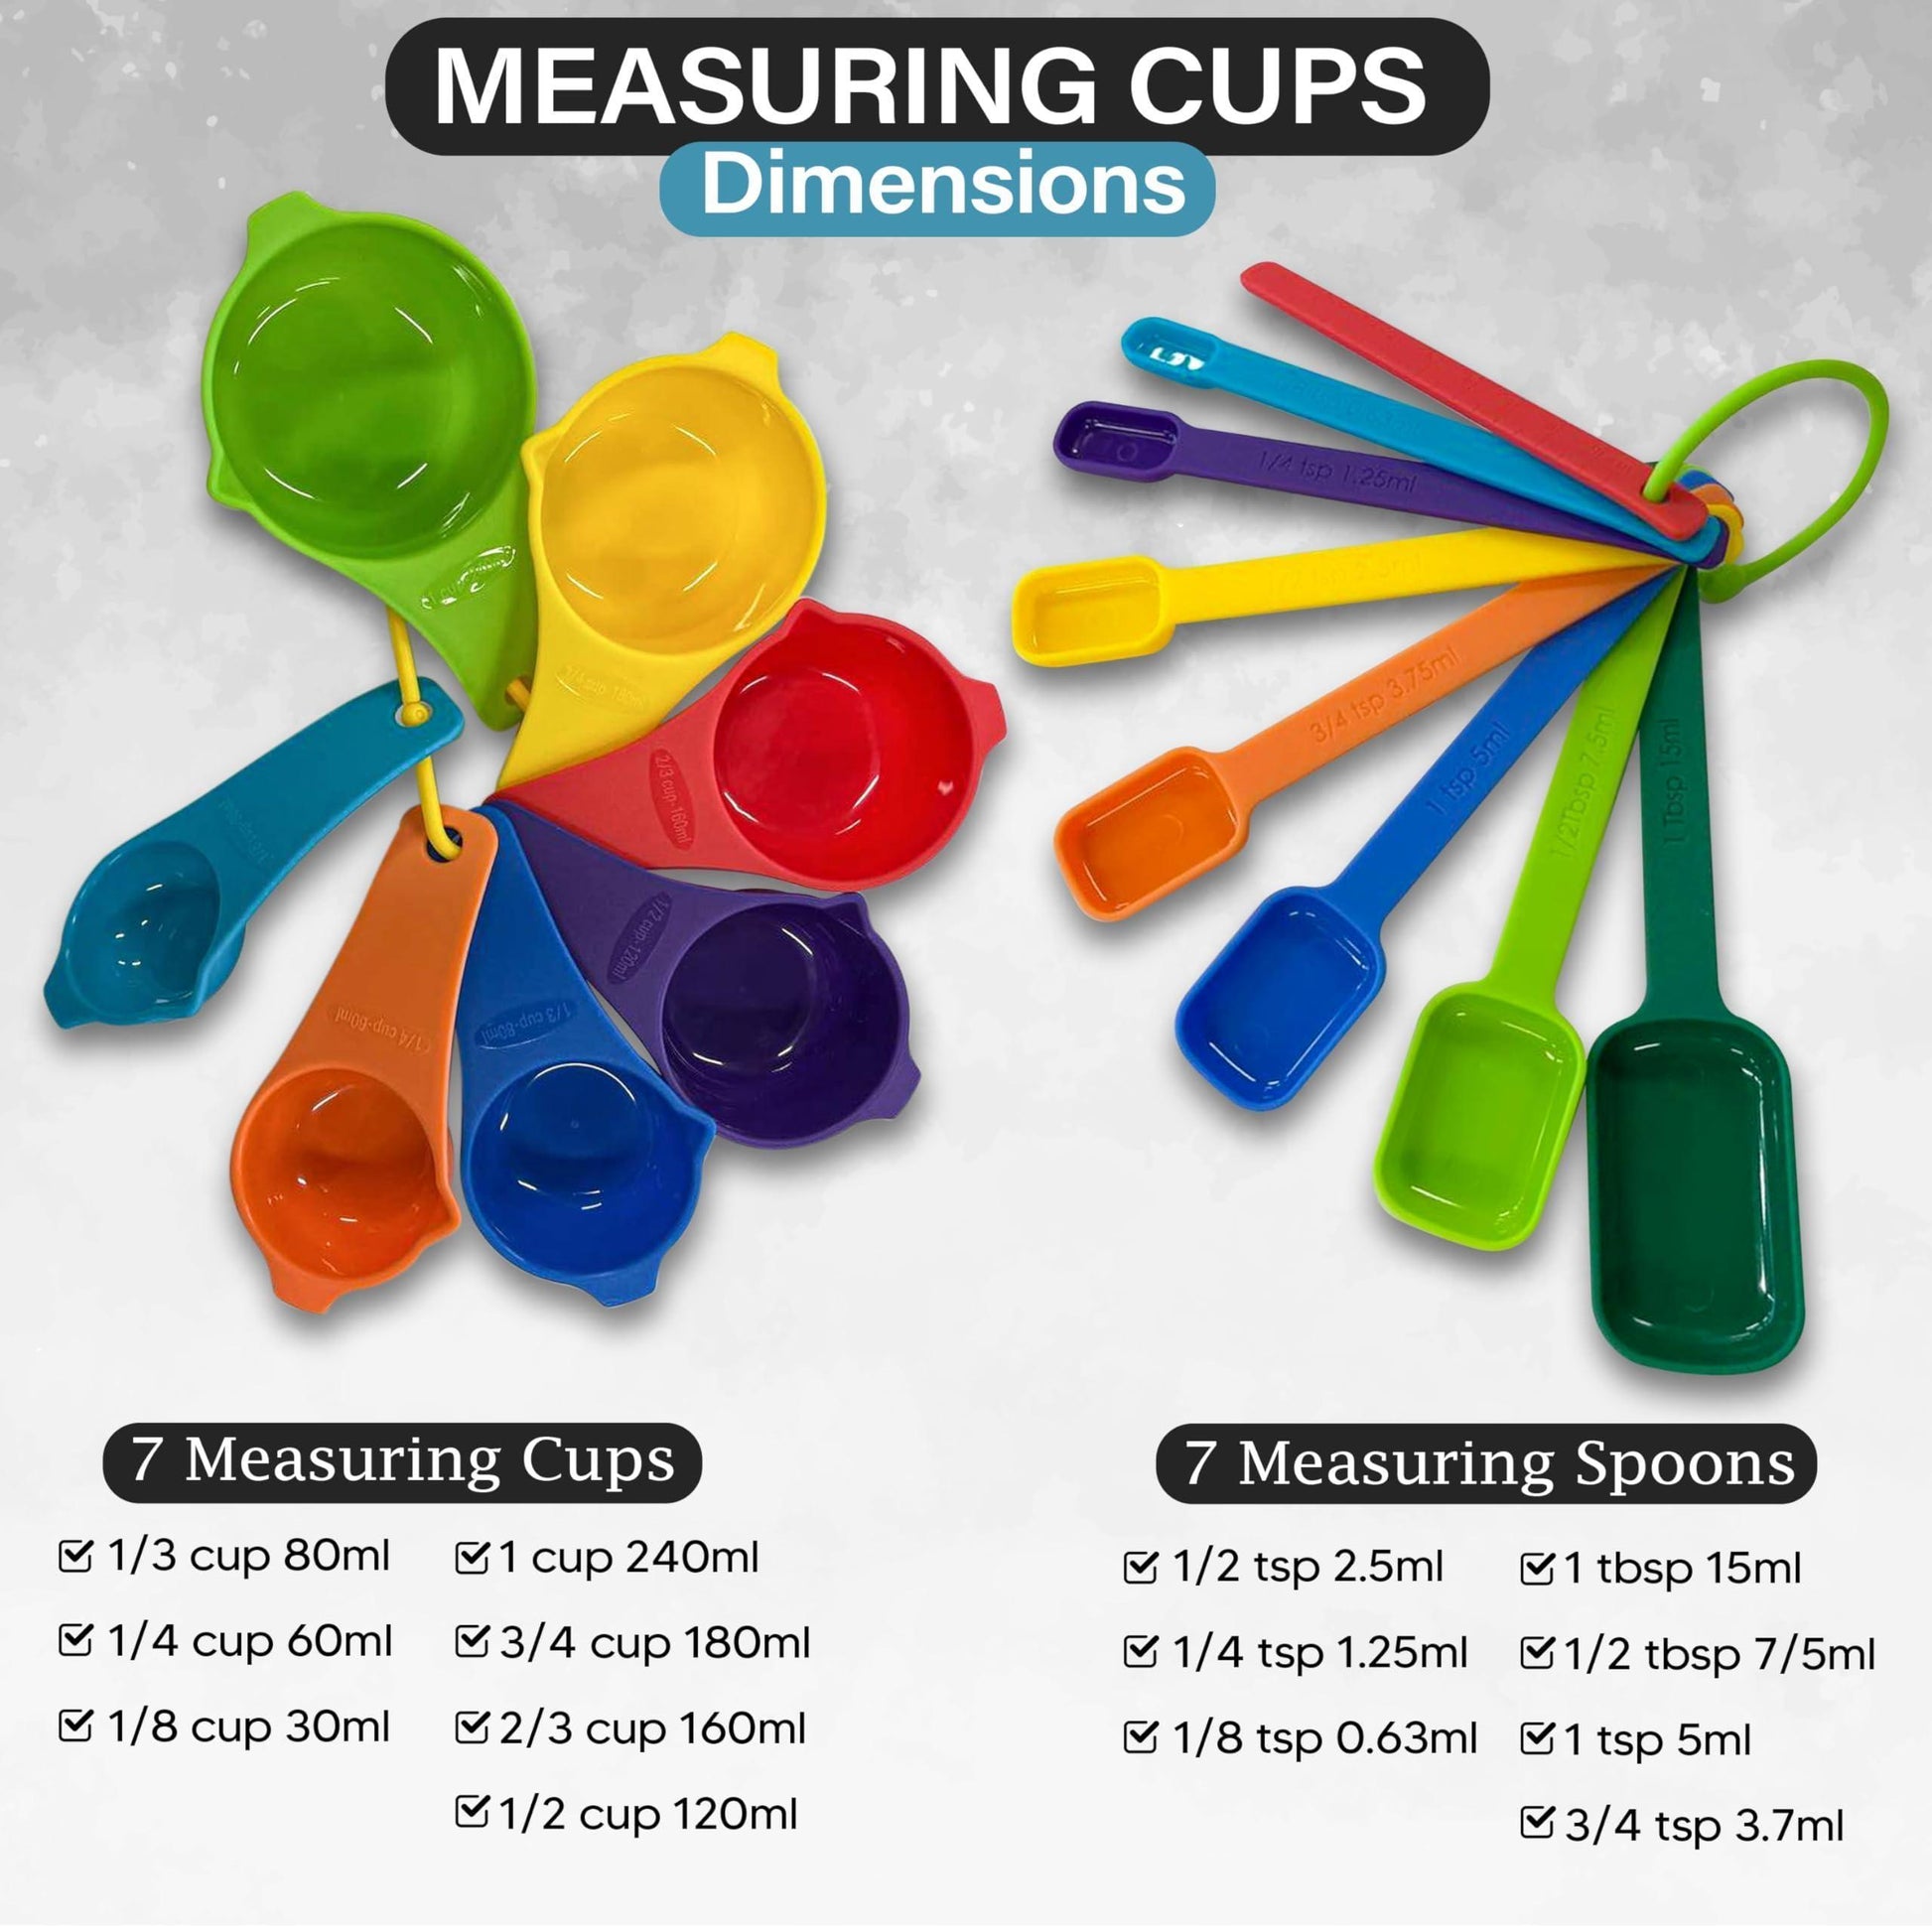 Measuring Cups and Spoons Set 15 Piece Plastic Measuring Cup Set for Liquid and Dry Measuring Engraved Metric USA Measurement Cup Set for Baking Cooking Colorful BPA Free Measuring Cups - Loomini